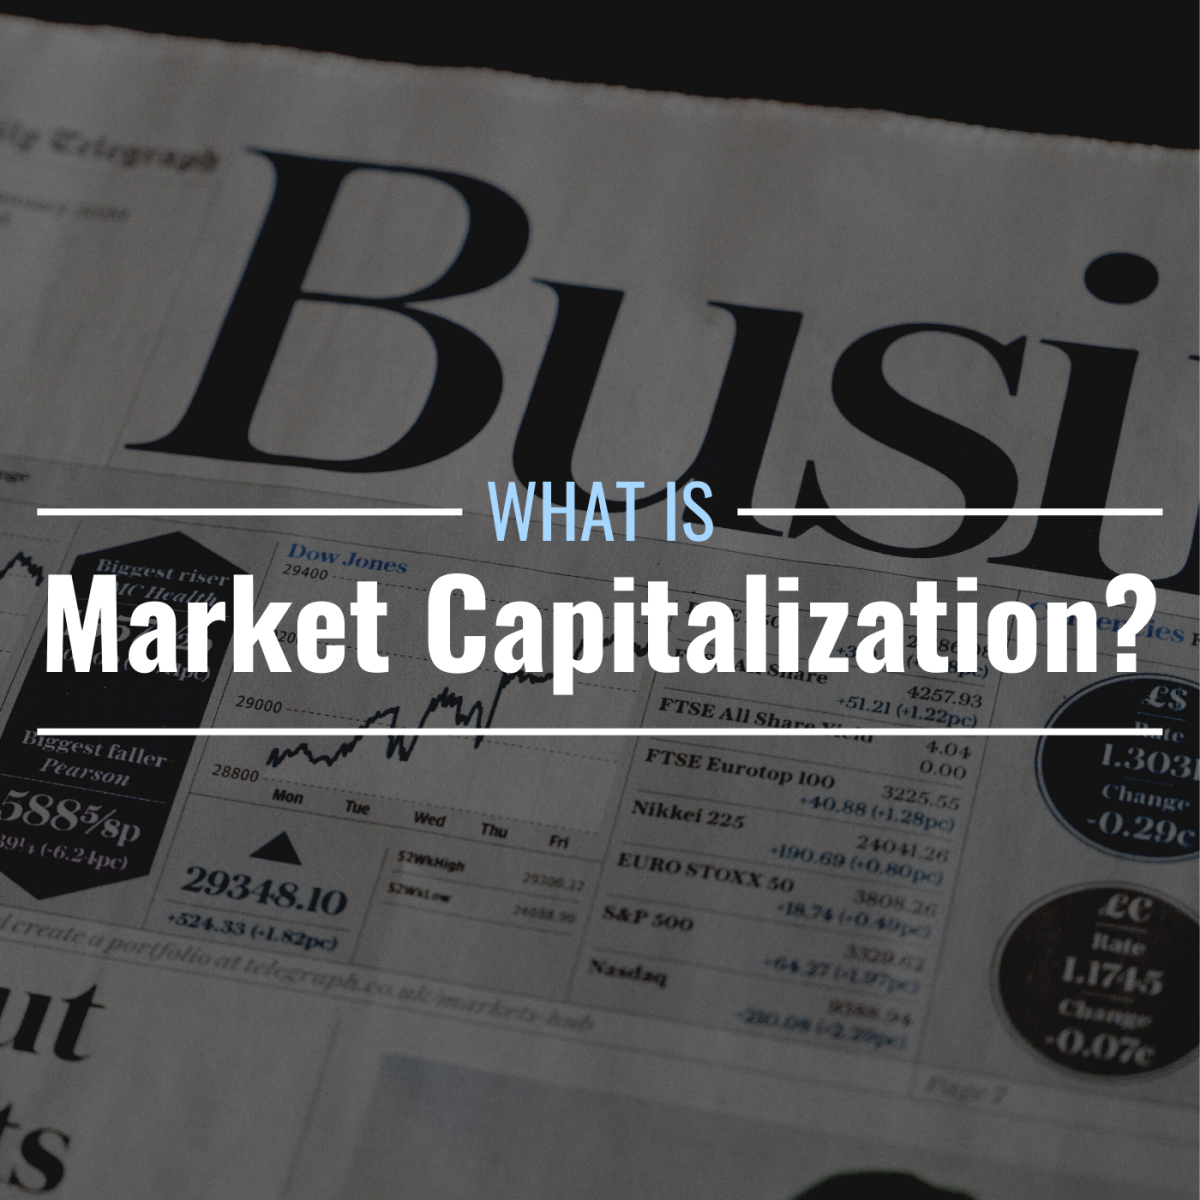 Darkened photo of a business/finance newspaper with text overlay that reads "What Is Market Capitalization?"